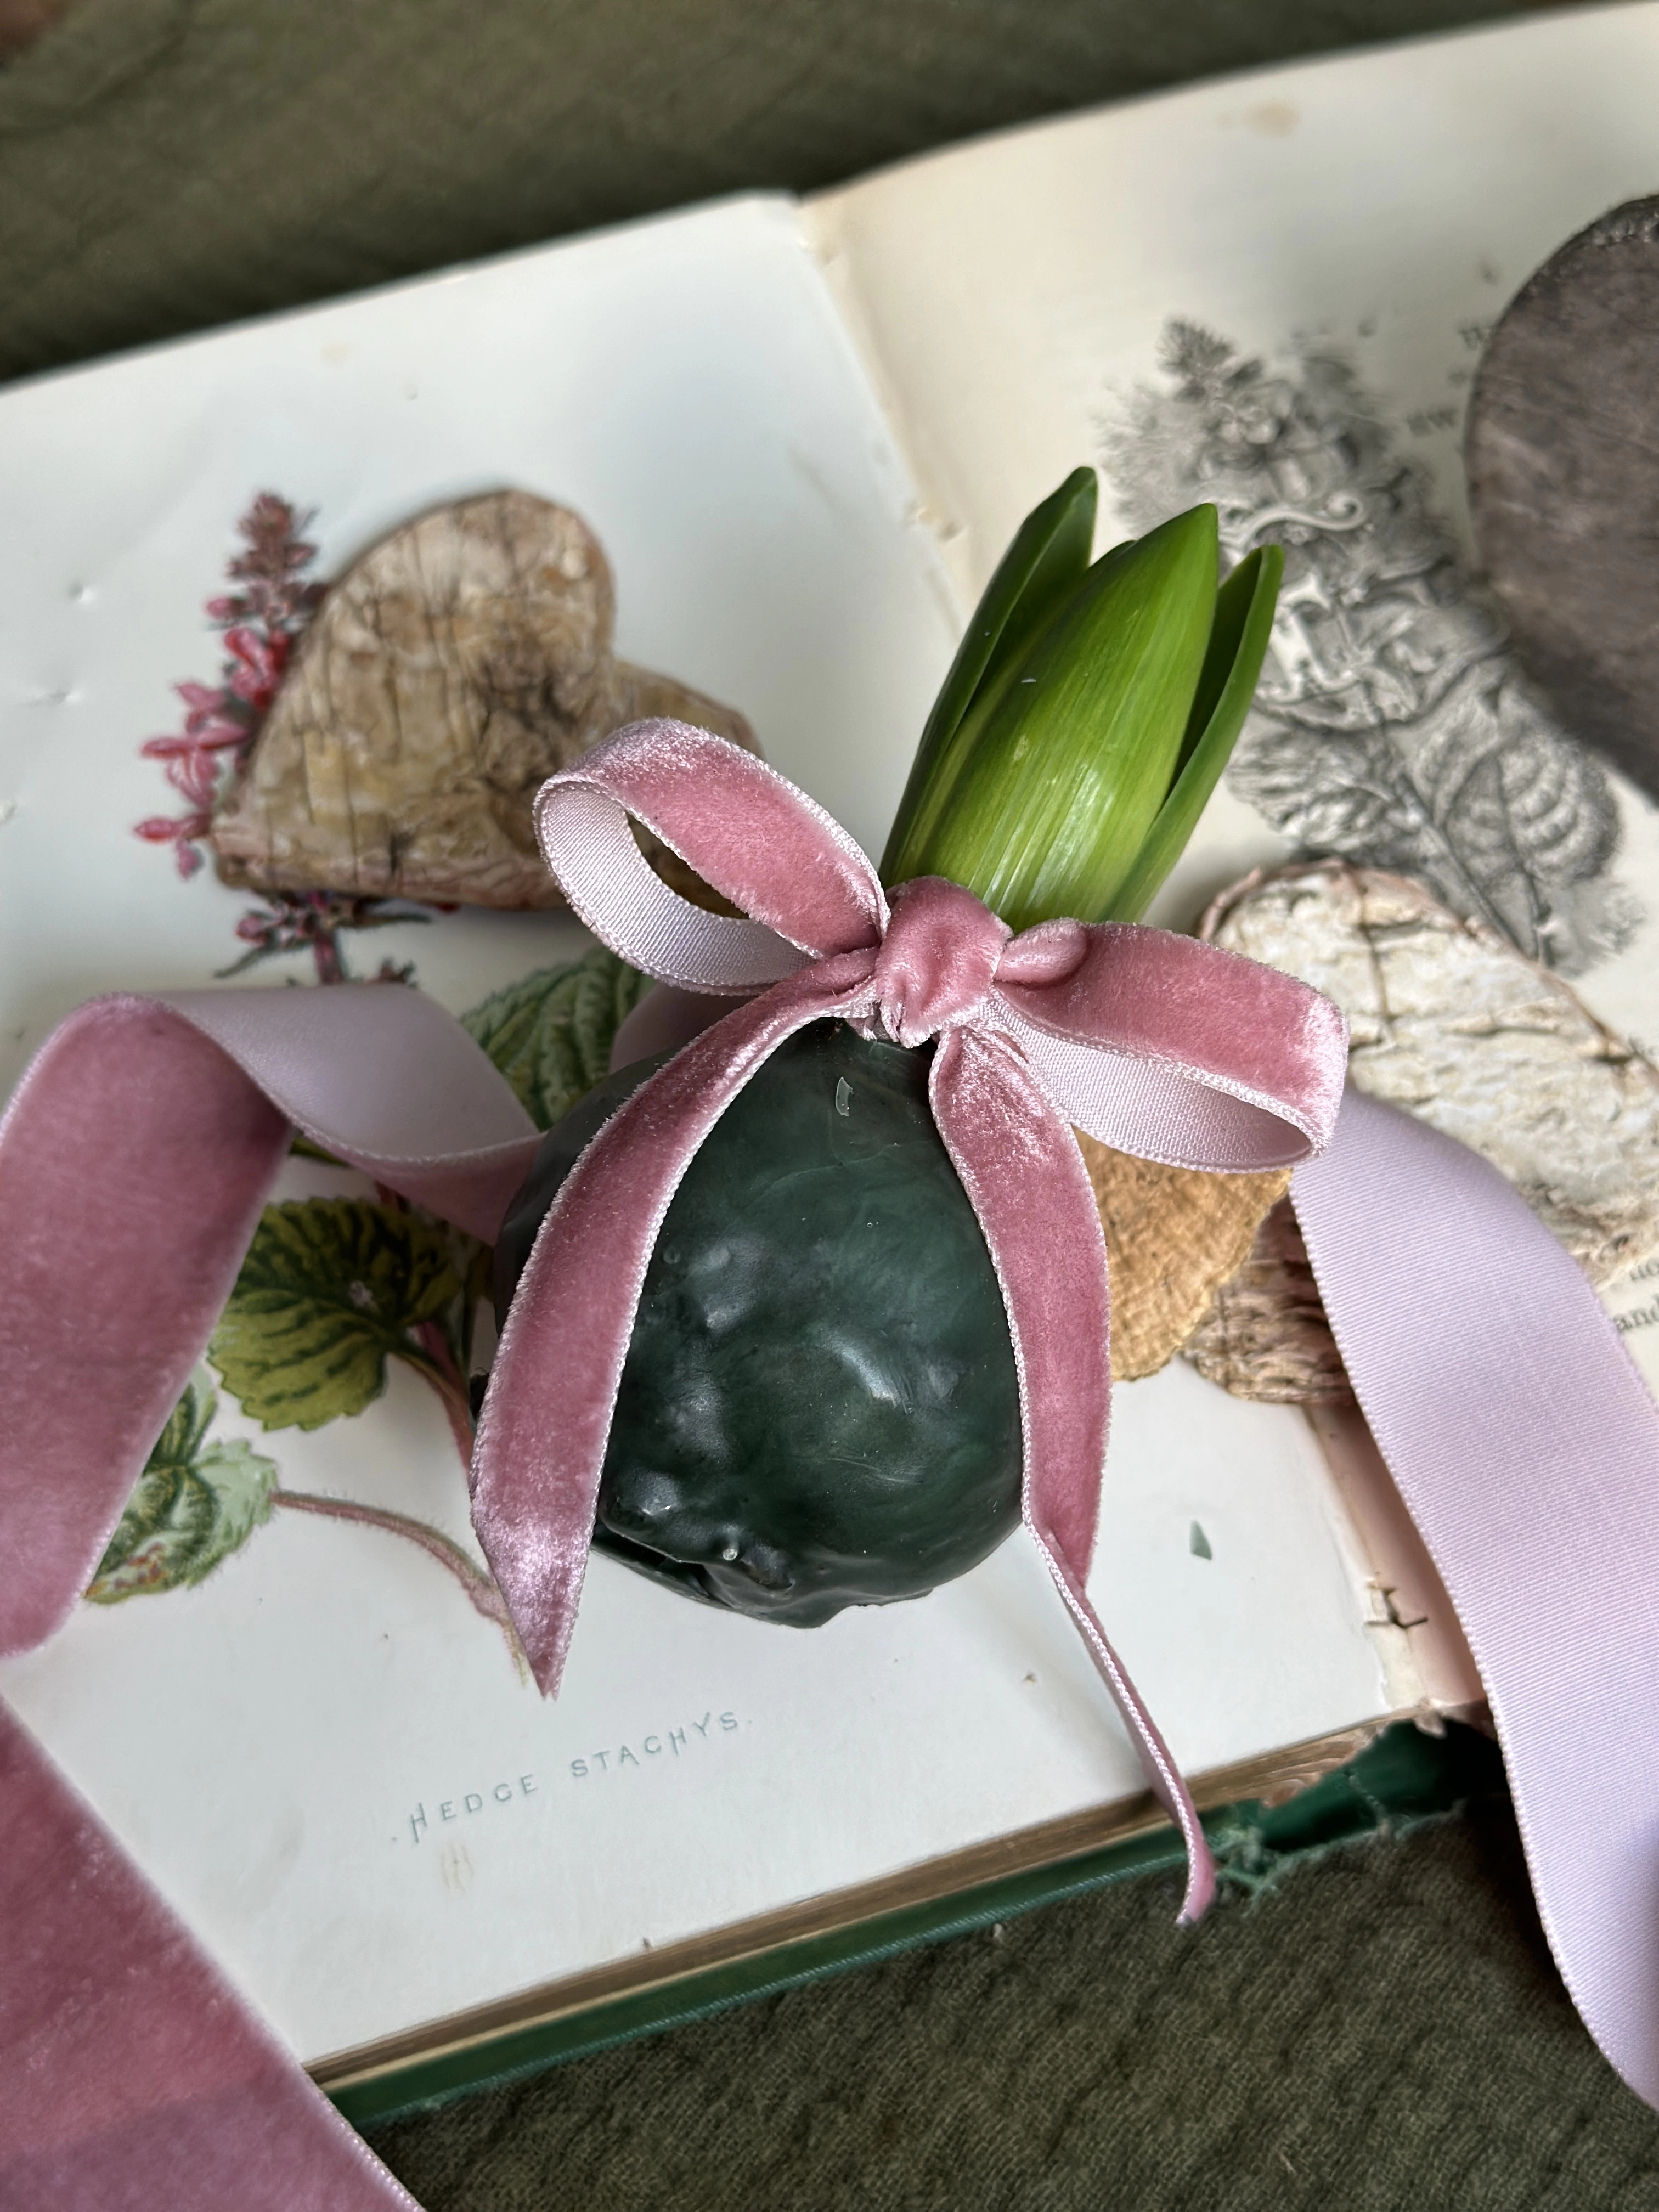 A fragrant hyacinth bulb encased in rich emerald green wax, its green stem sprouting from the wax. A Dusty pink velvet ribbon is tied in a bow around the sprouting stem. The waxed bulb sits atop a decorative springtime book.